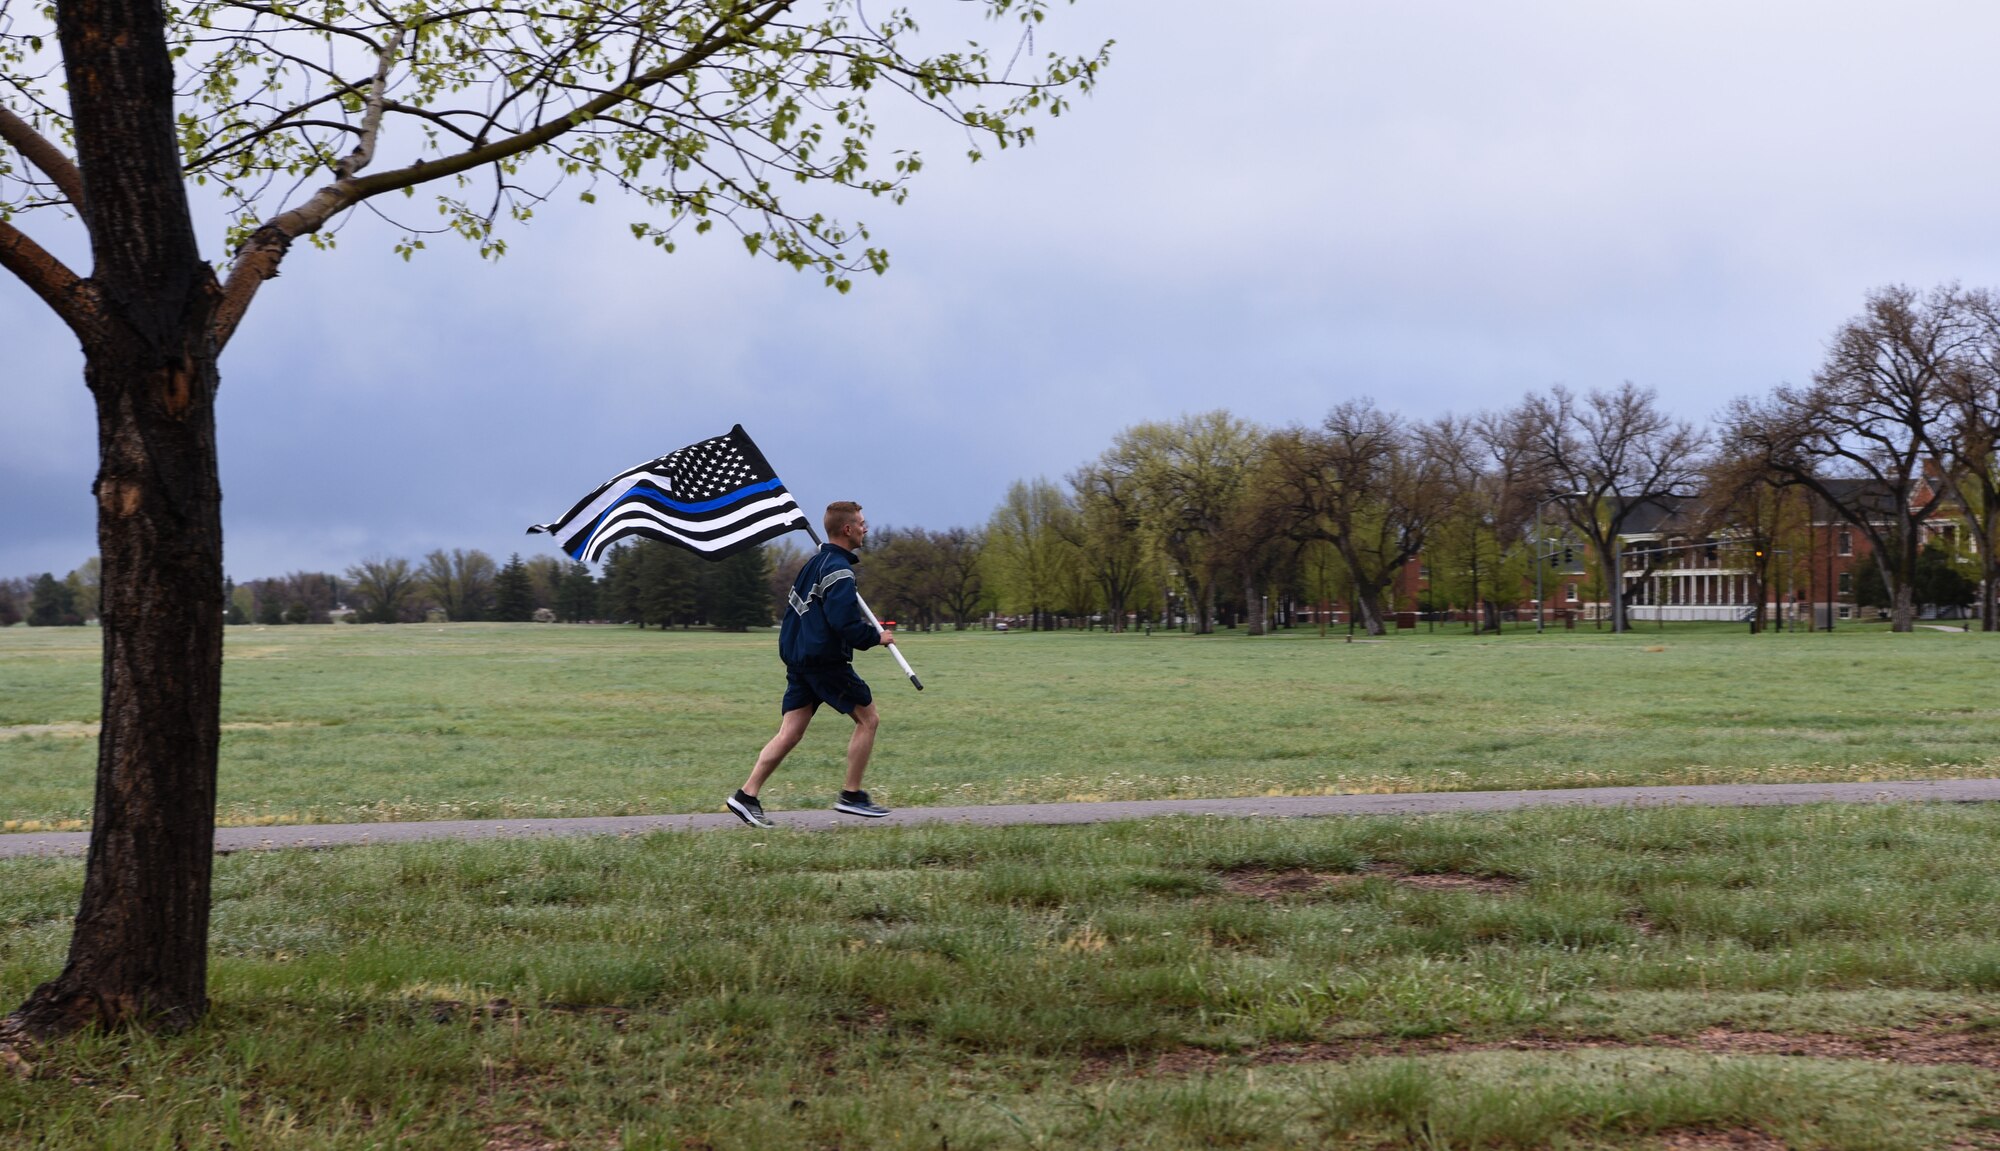 1st Lt. Justin Fitzwater, 90th Security Support Squadron defender, runs with the thin blue line flag during a twenty-four-hour remembrance run for Police Week May 13, 2018, on F.E. Warren Air Force Base, Wyo. The run was held to honor Defenders and civilian police alike who have paid the ultimate sacrifice. Various people from around base came to support the run and keep it going for the full 24 hours. In 1962, President John F. Kennedy signed a proclamation which designated May 15 as Peace Officers Memorial Day and the week in which that date falls as Police Week. People all across the United States participate in various events which honor those who have paid the ultimate sacrifice. (U.S. Air Force photo by Airman 1st Class Braydon Williams)